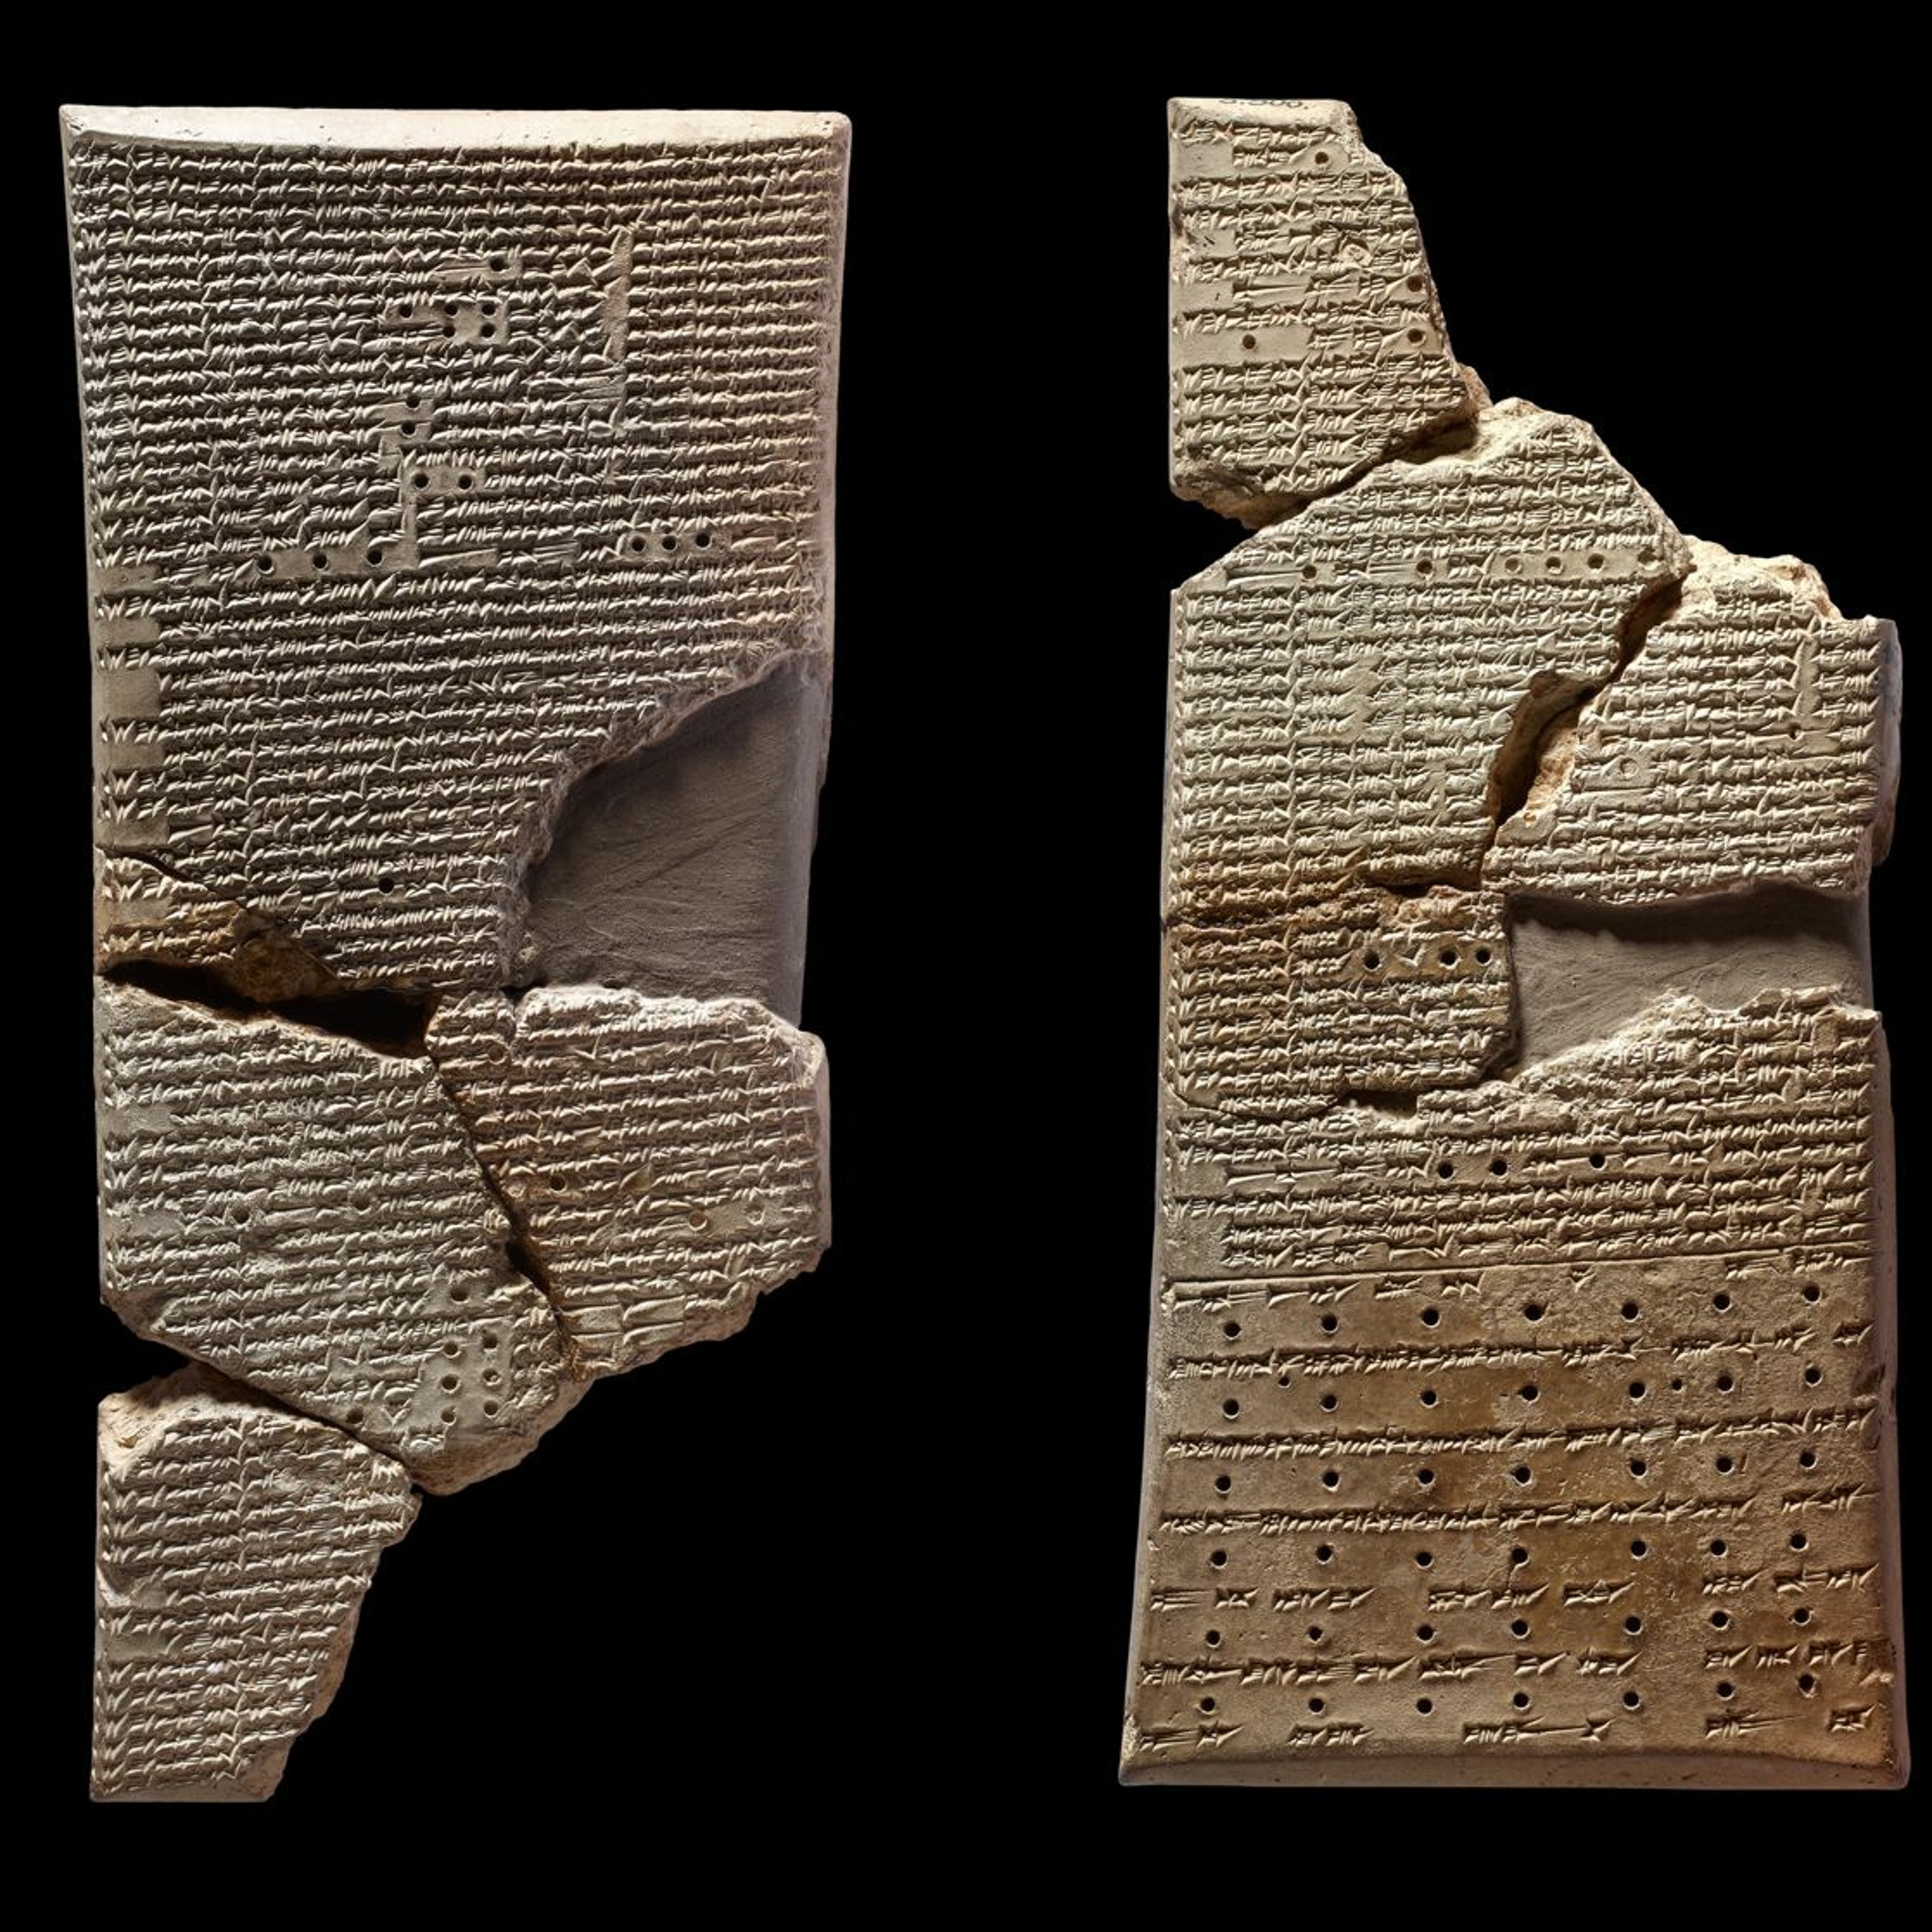 Taking Stock of 5 Years of Historiansplaining, & Teaser: The Library of Ashurbanipal